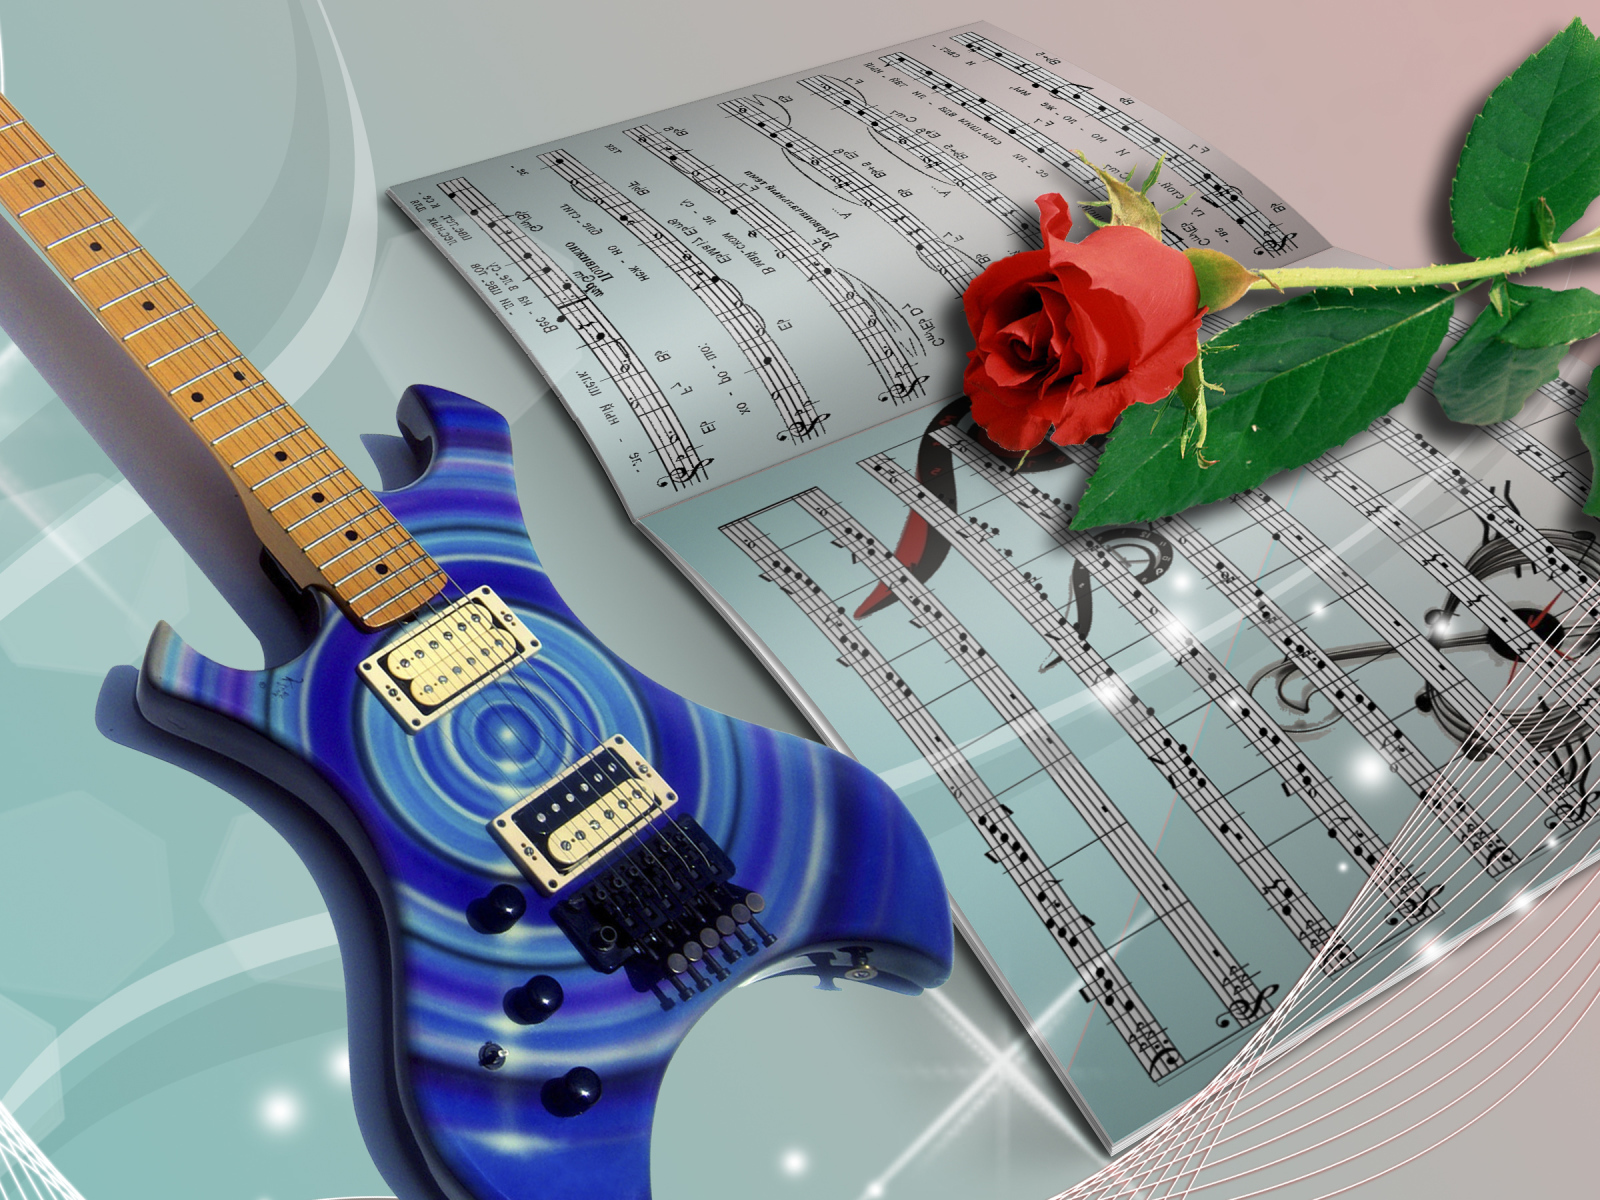 	   Guitar and rose on the notes